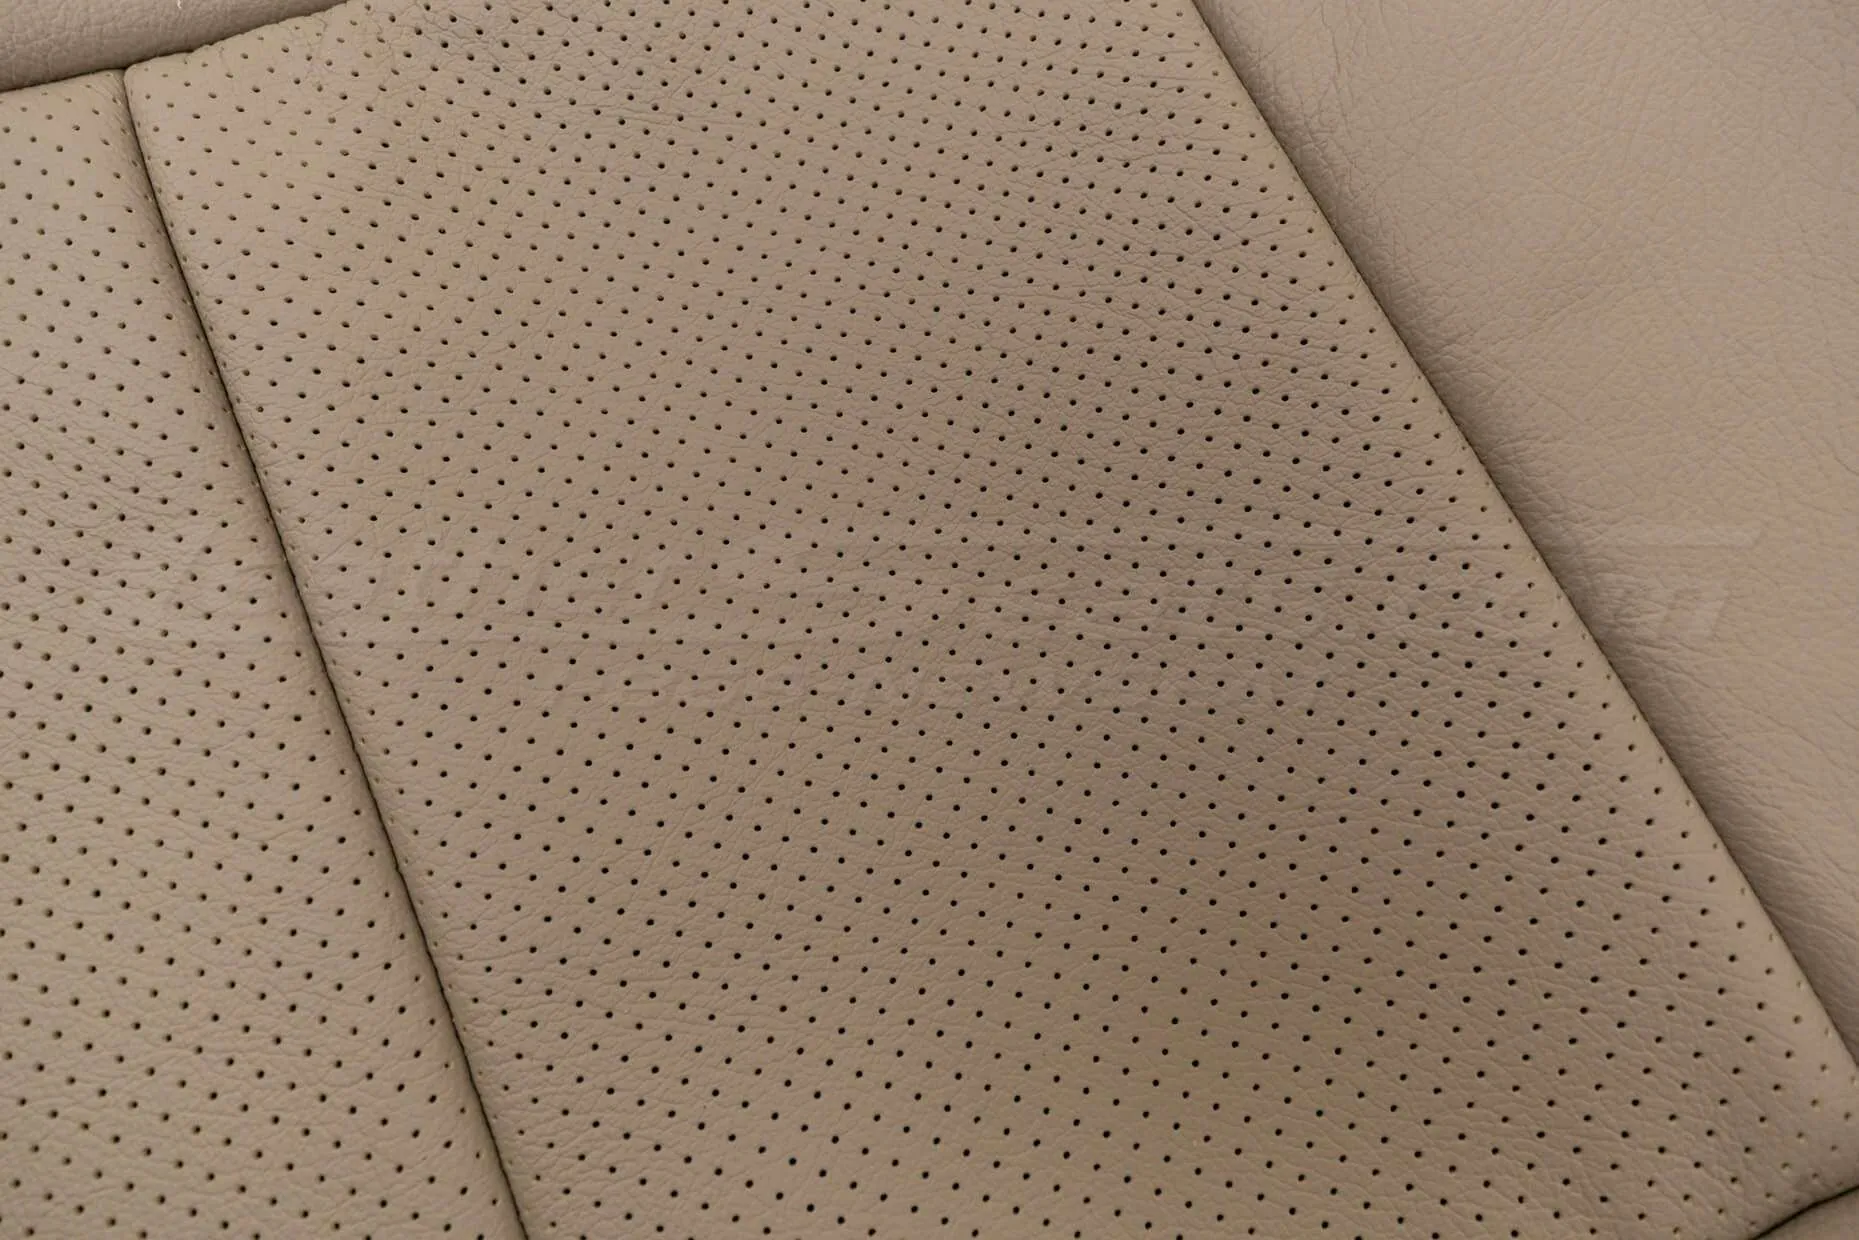 Perforated combo close-up